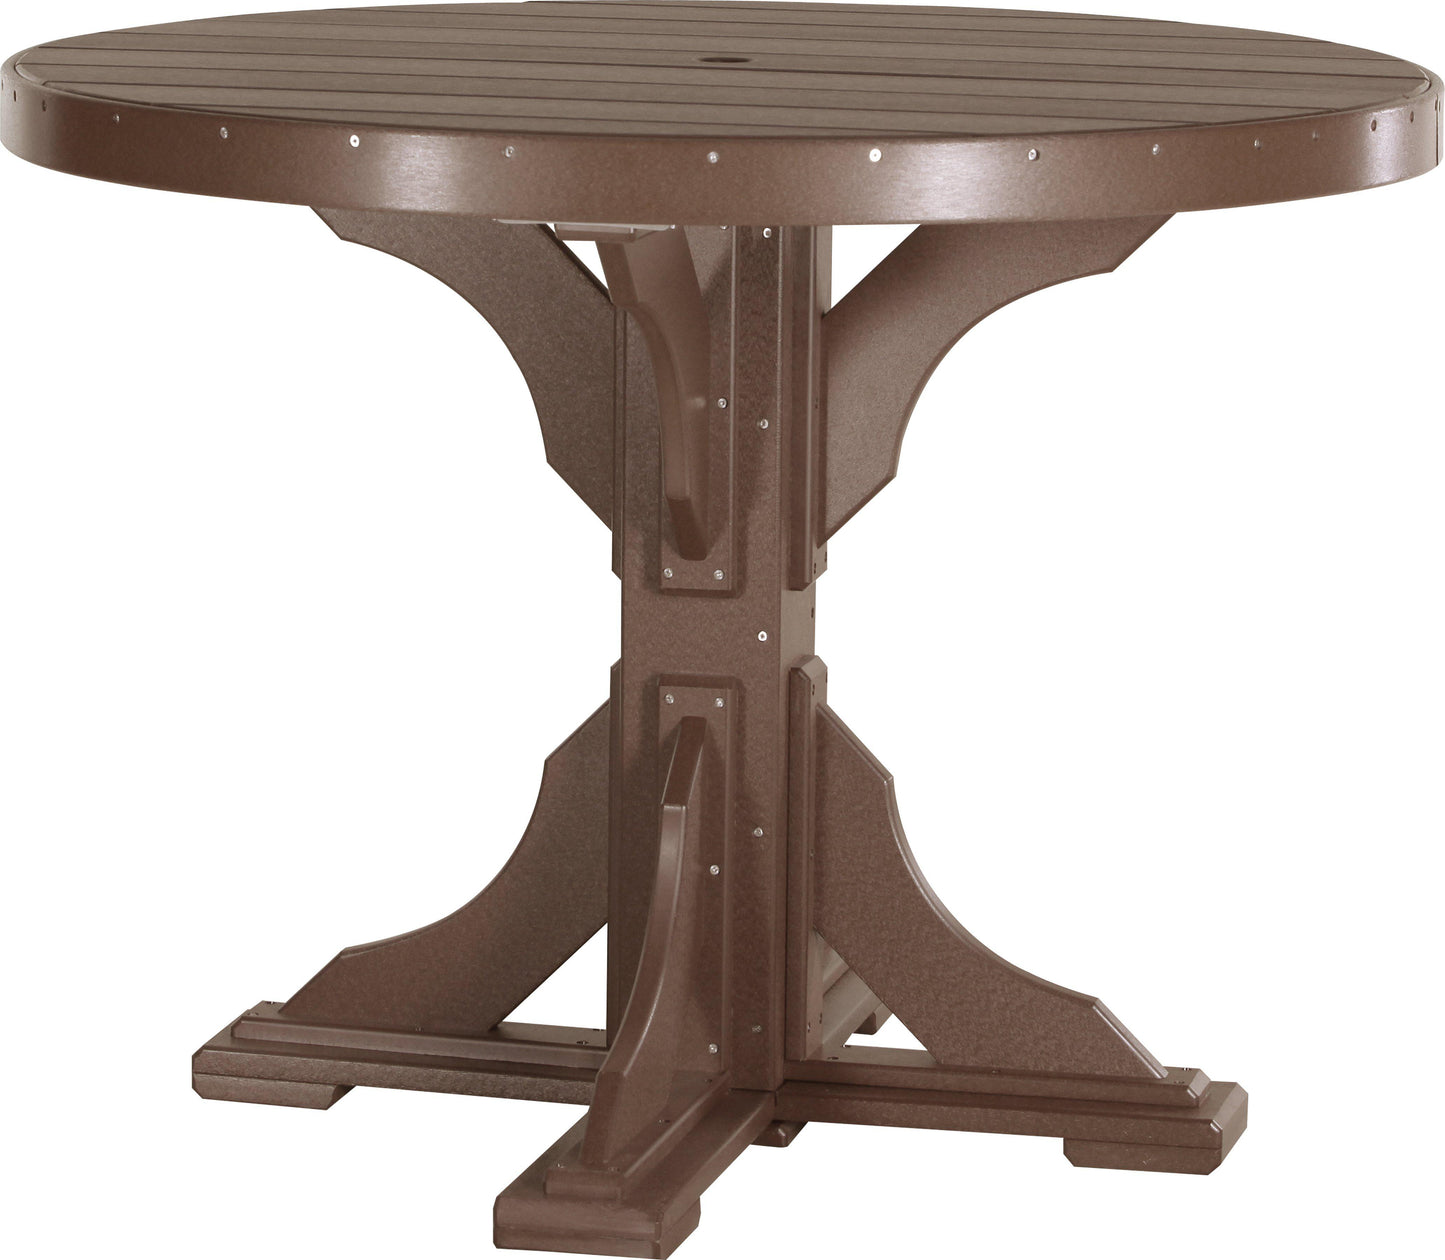 LuxCraft Recycled Plastic 4' Round Table (COUNTER HEIGHT) - LEAD TIME TO SHIP 3 TO 4 WEEKS